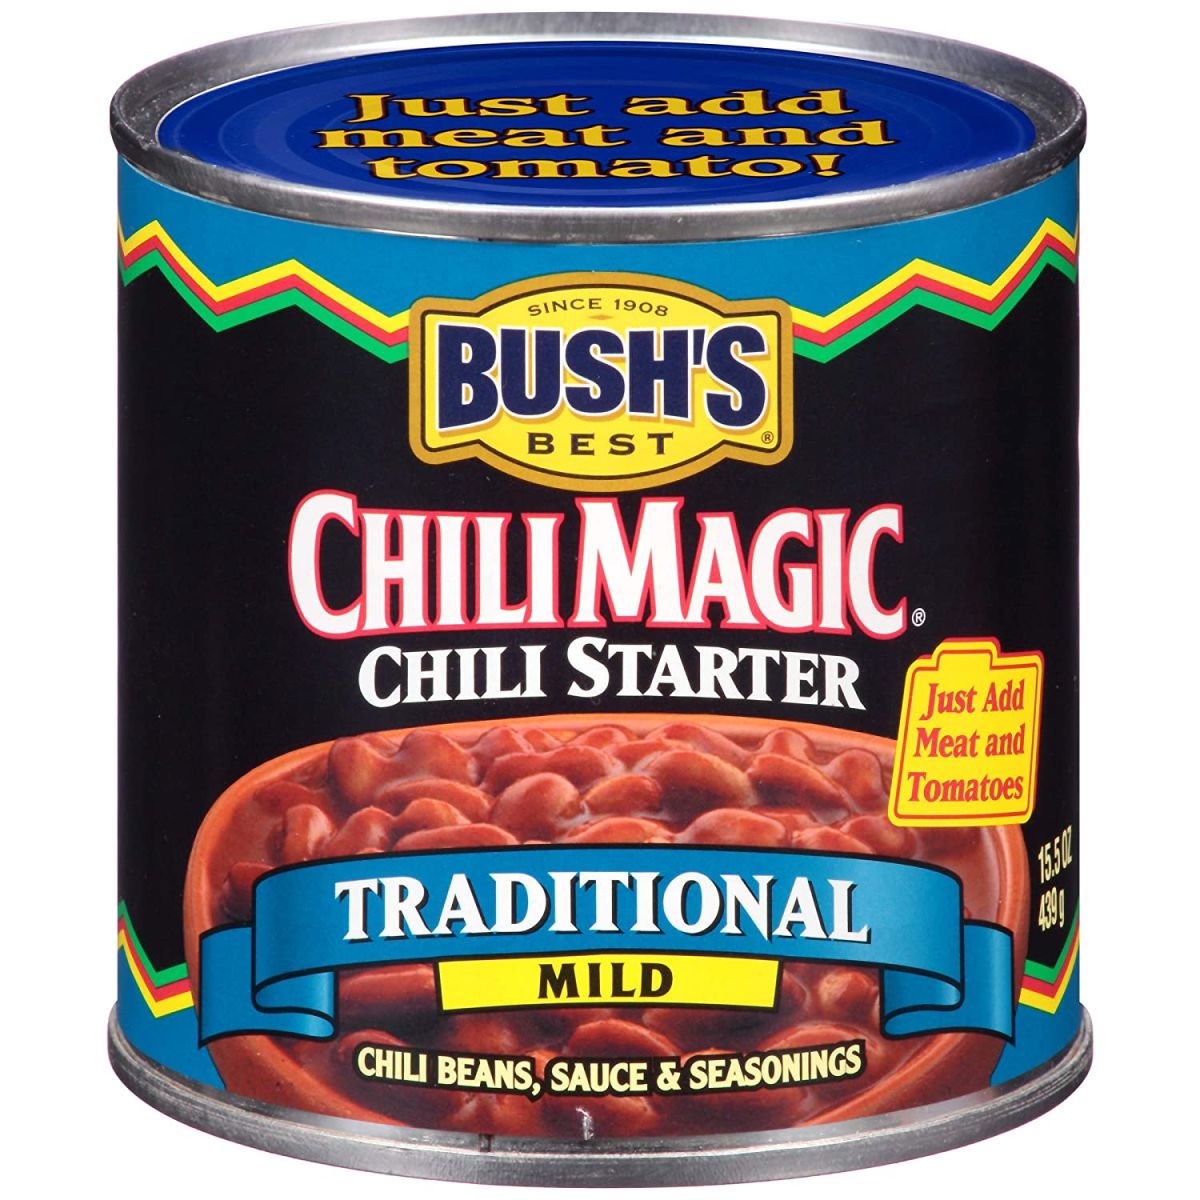 BUSH'S BEST Canned Chili